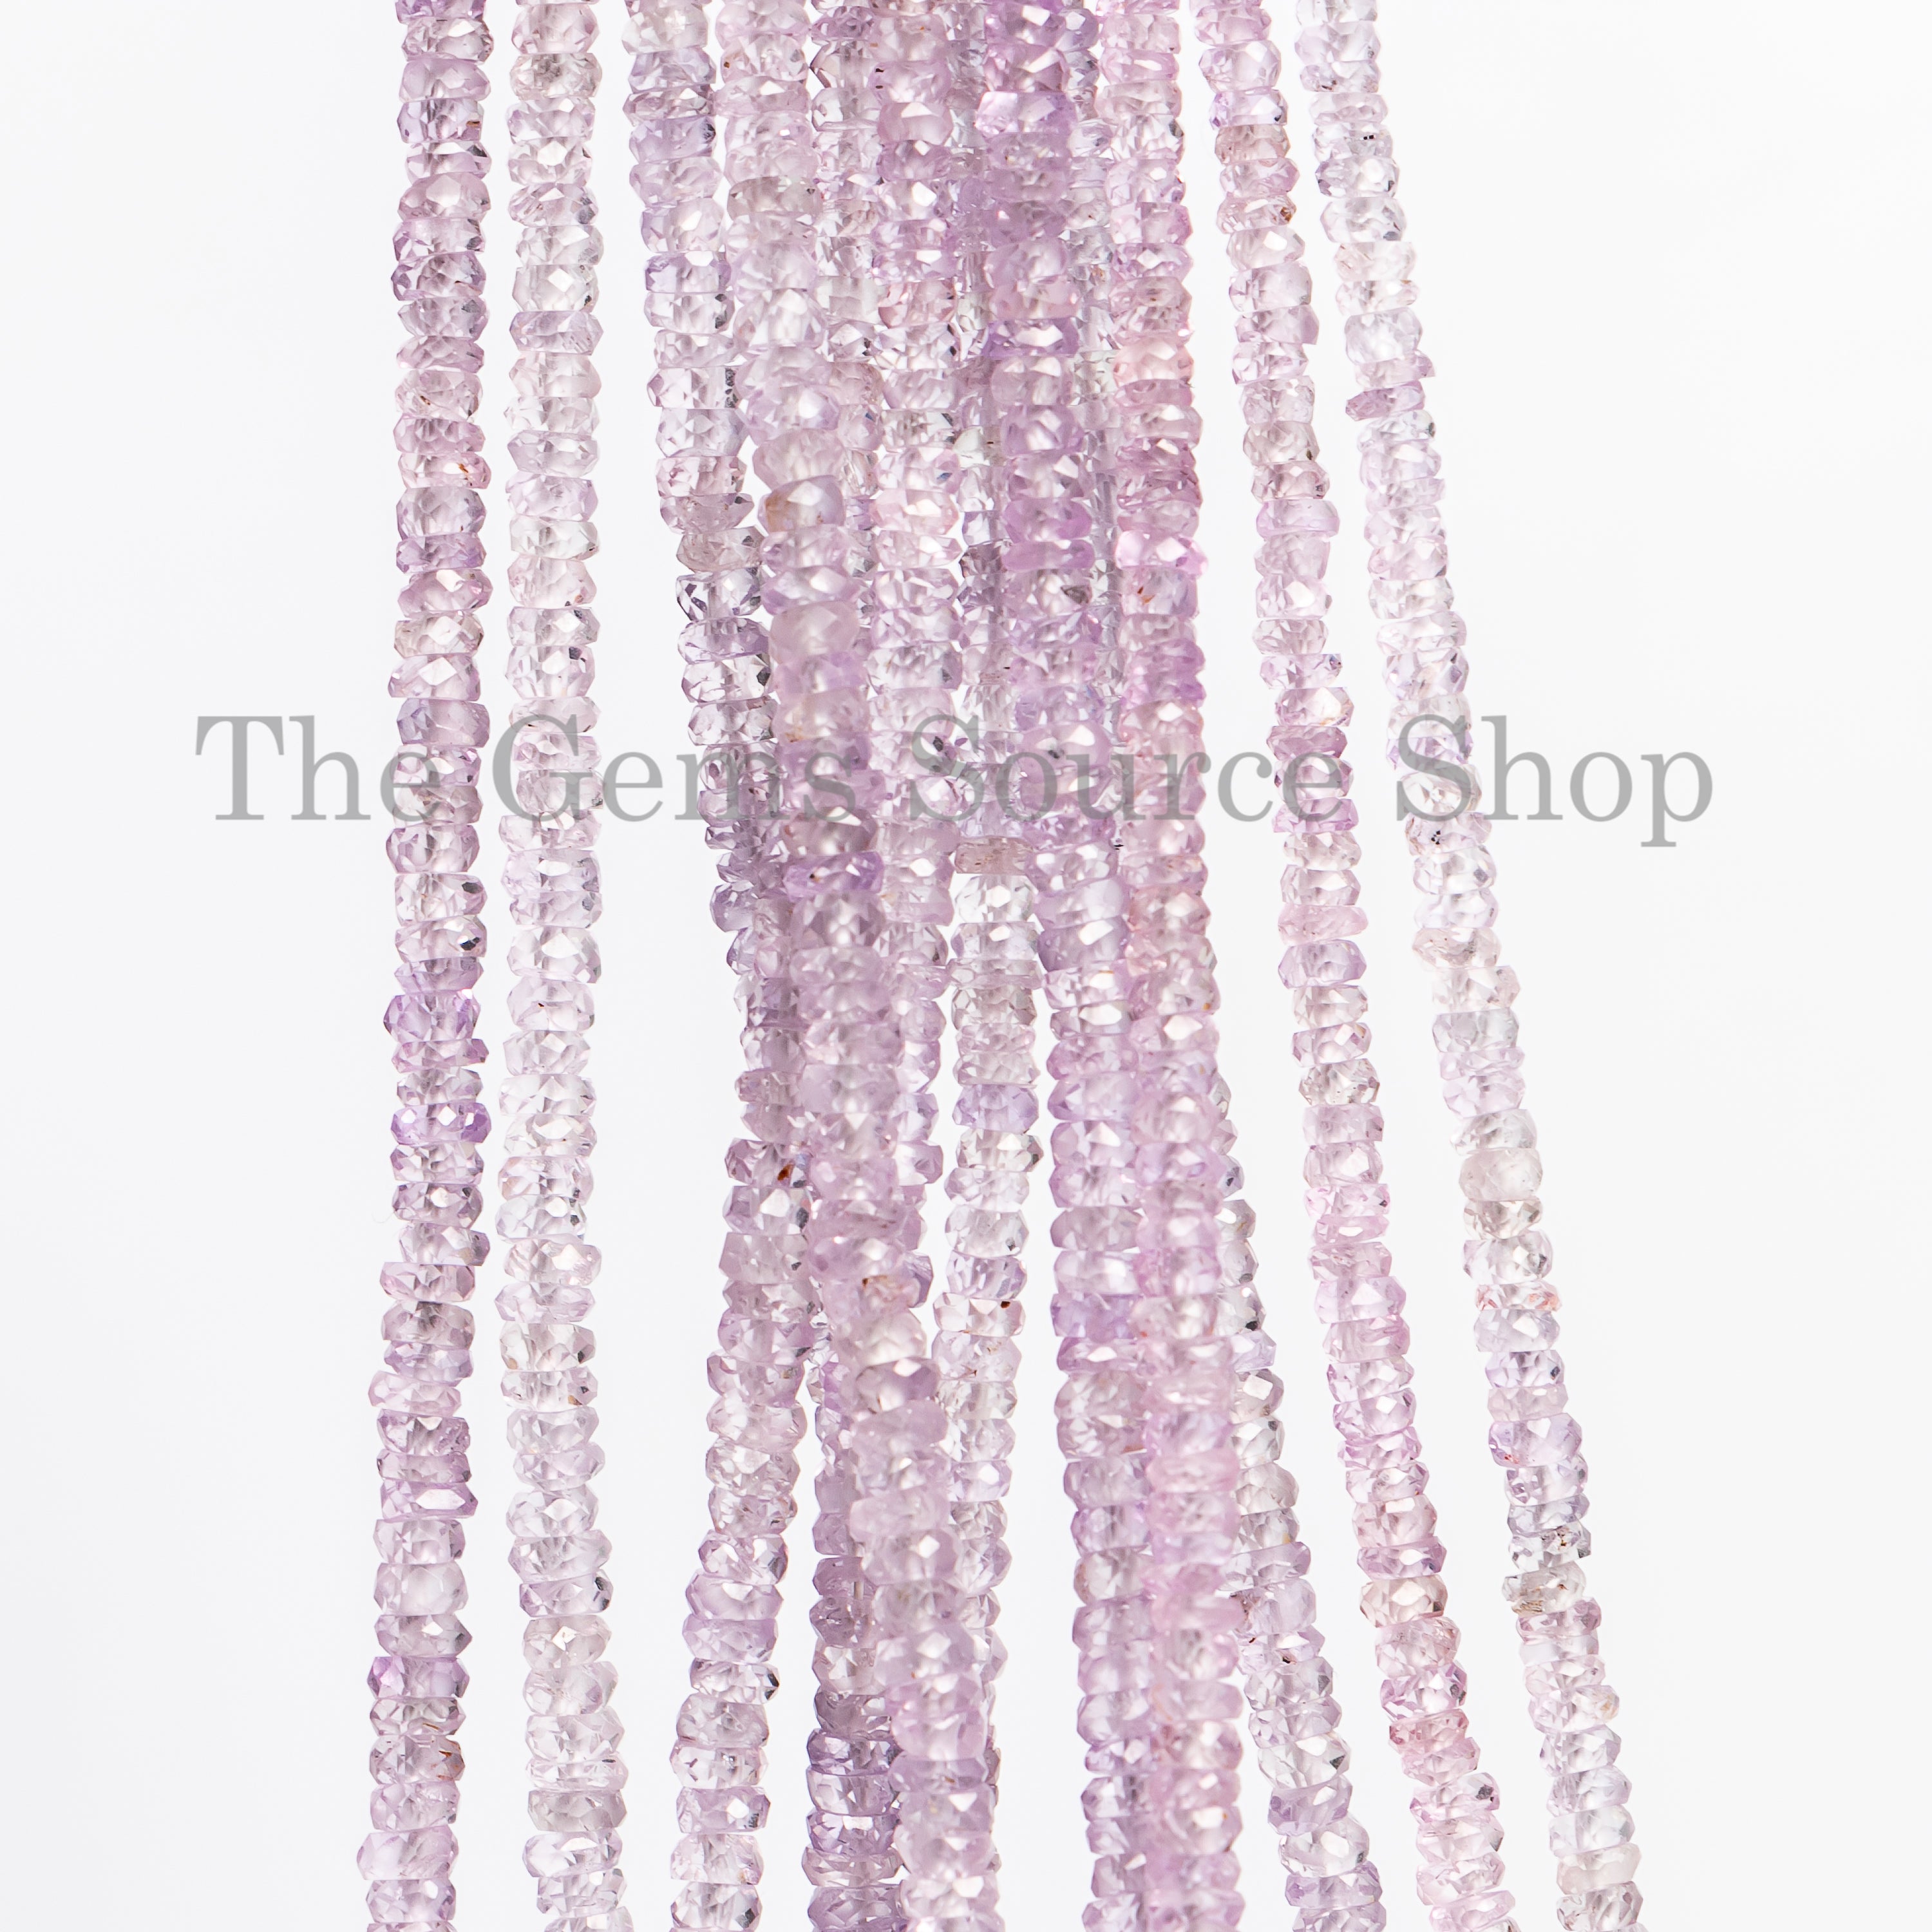 Lavender Sapphire Faceted Rondelle Beads, Natural Precious Gemstone Beads, 2.5-4mm Sapphire Beads, TGS-5059